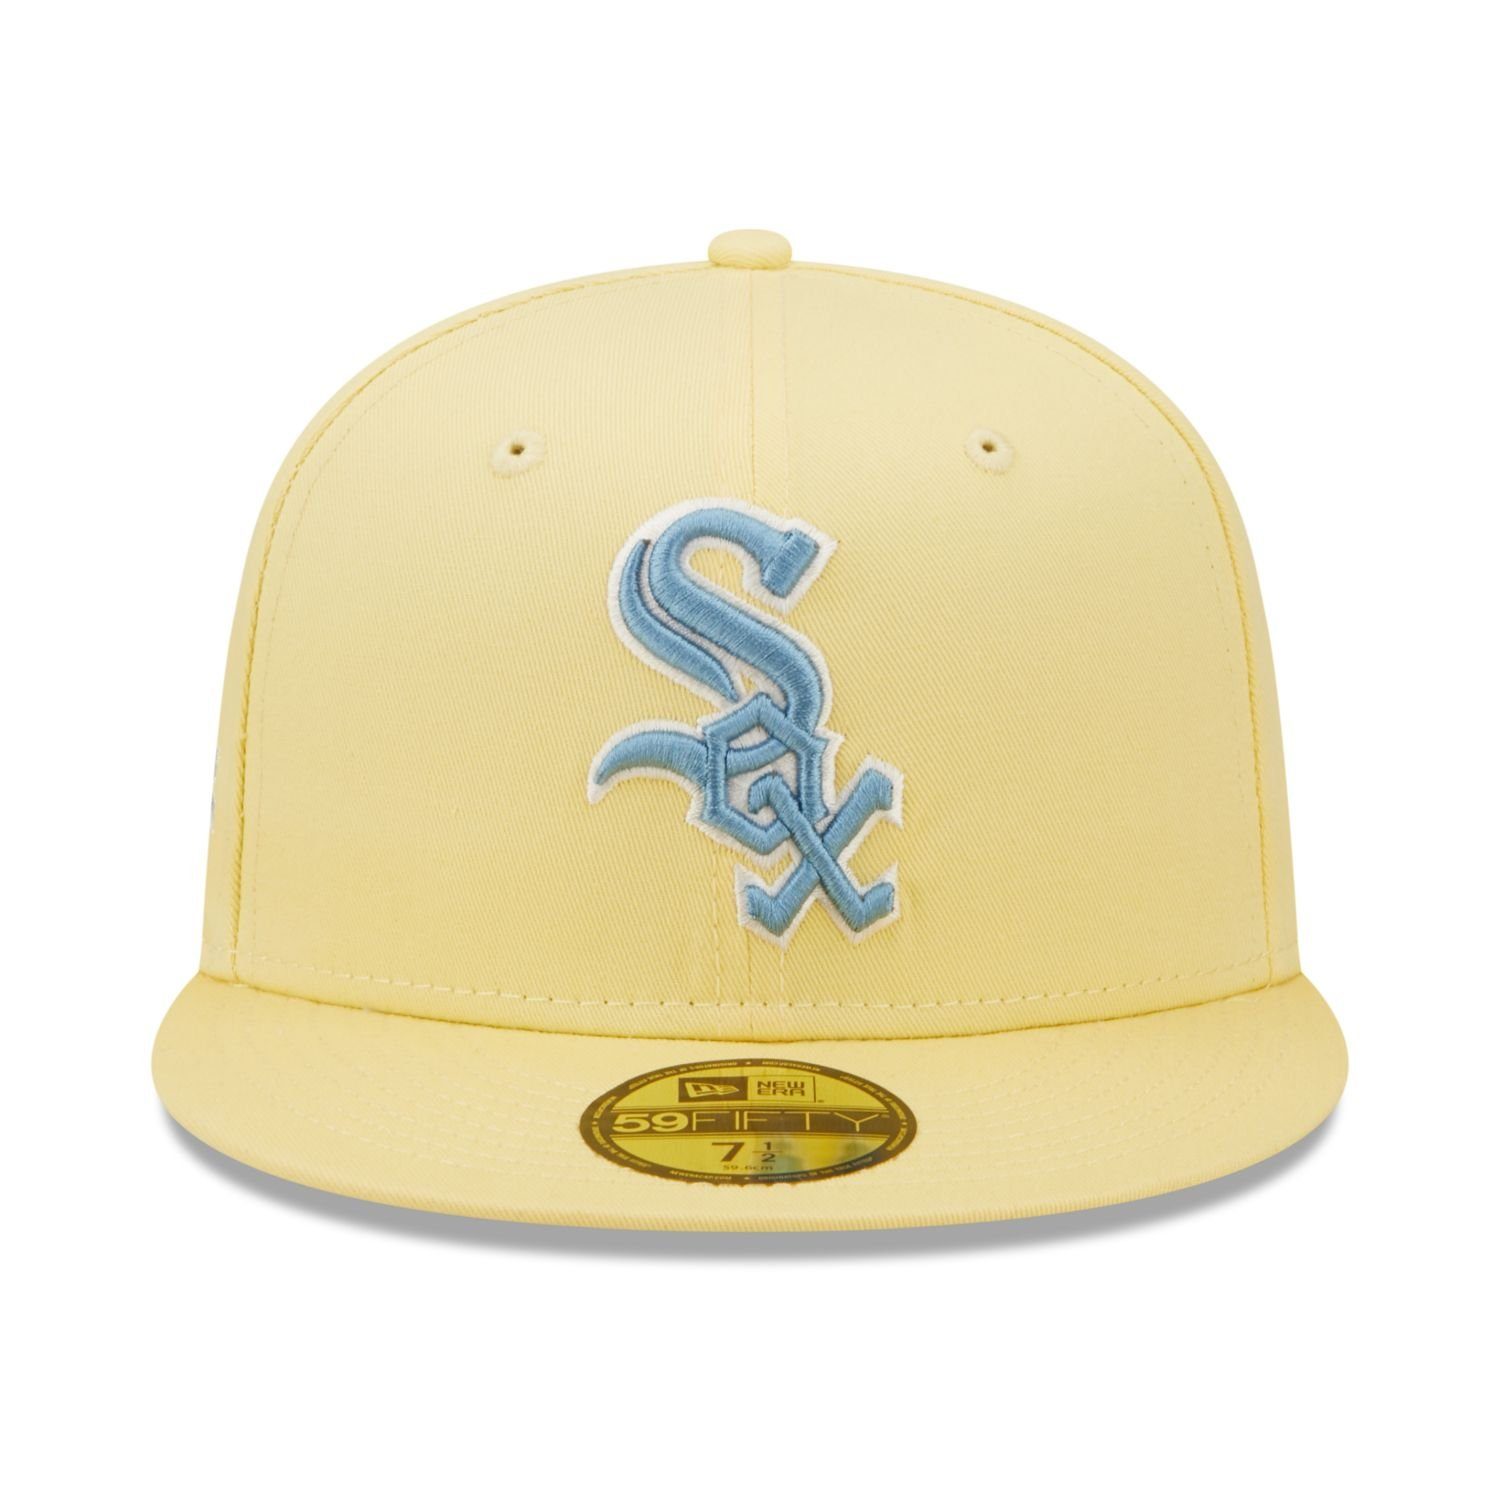 New Era White Fitted 59Fifty Sox COOPERSTOWN Cap Chicago